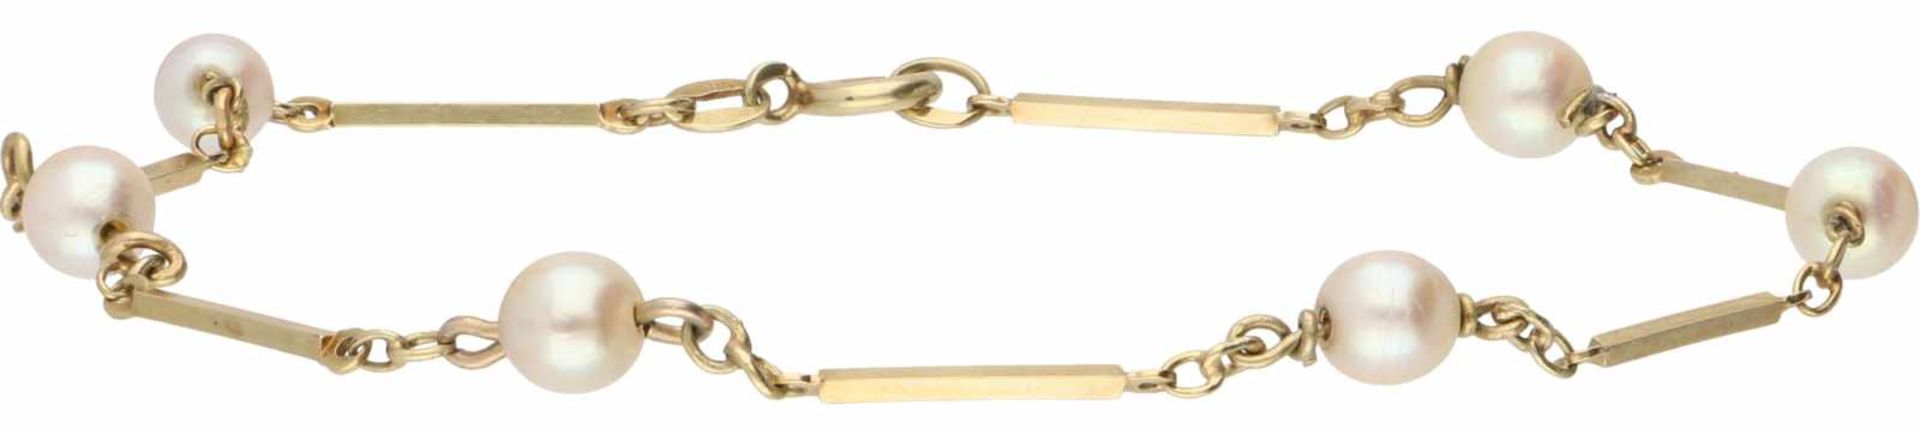 Bracelet yellow gold, cultured pearl - 14 ct.